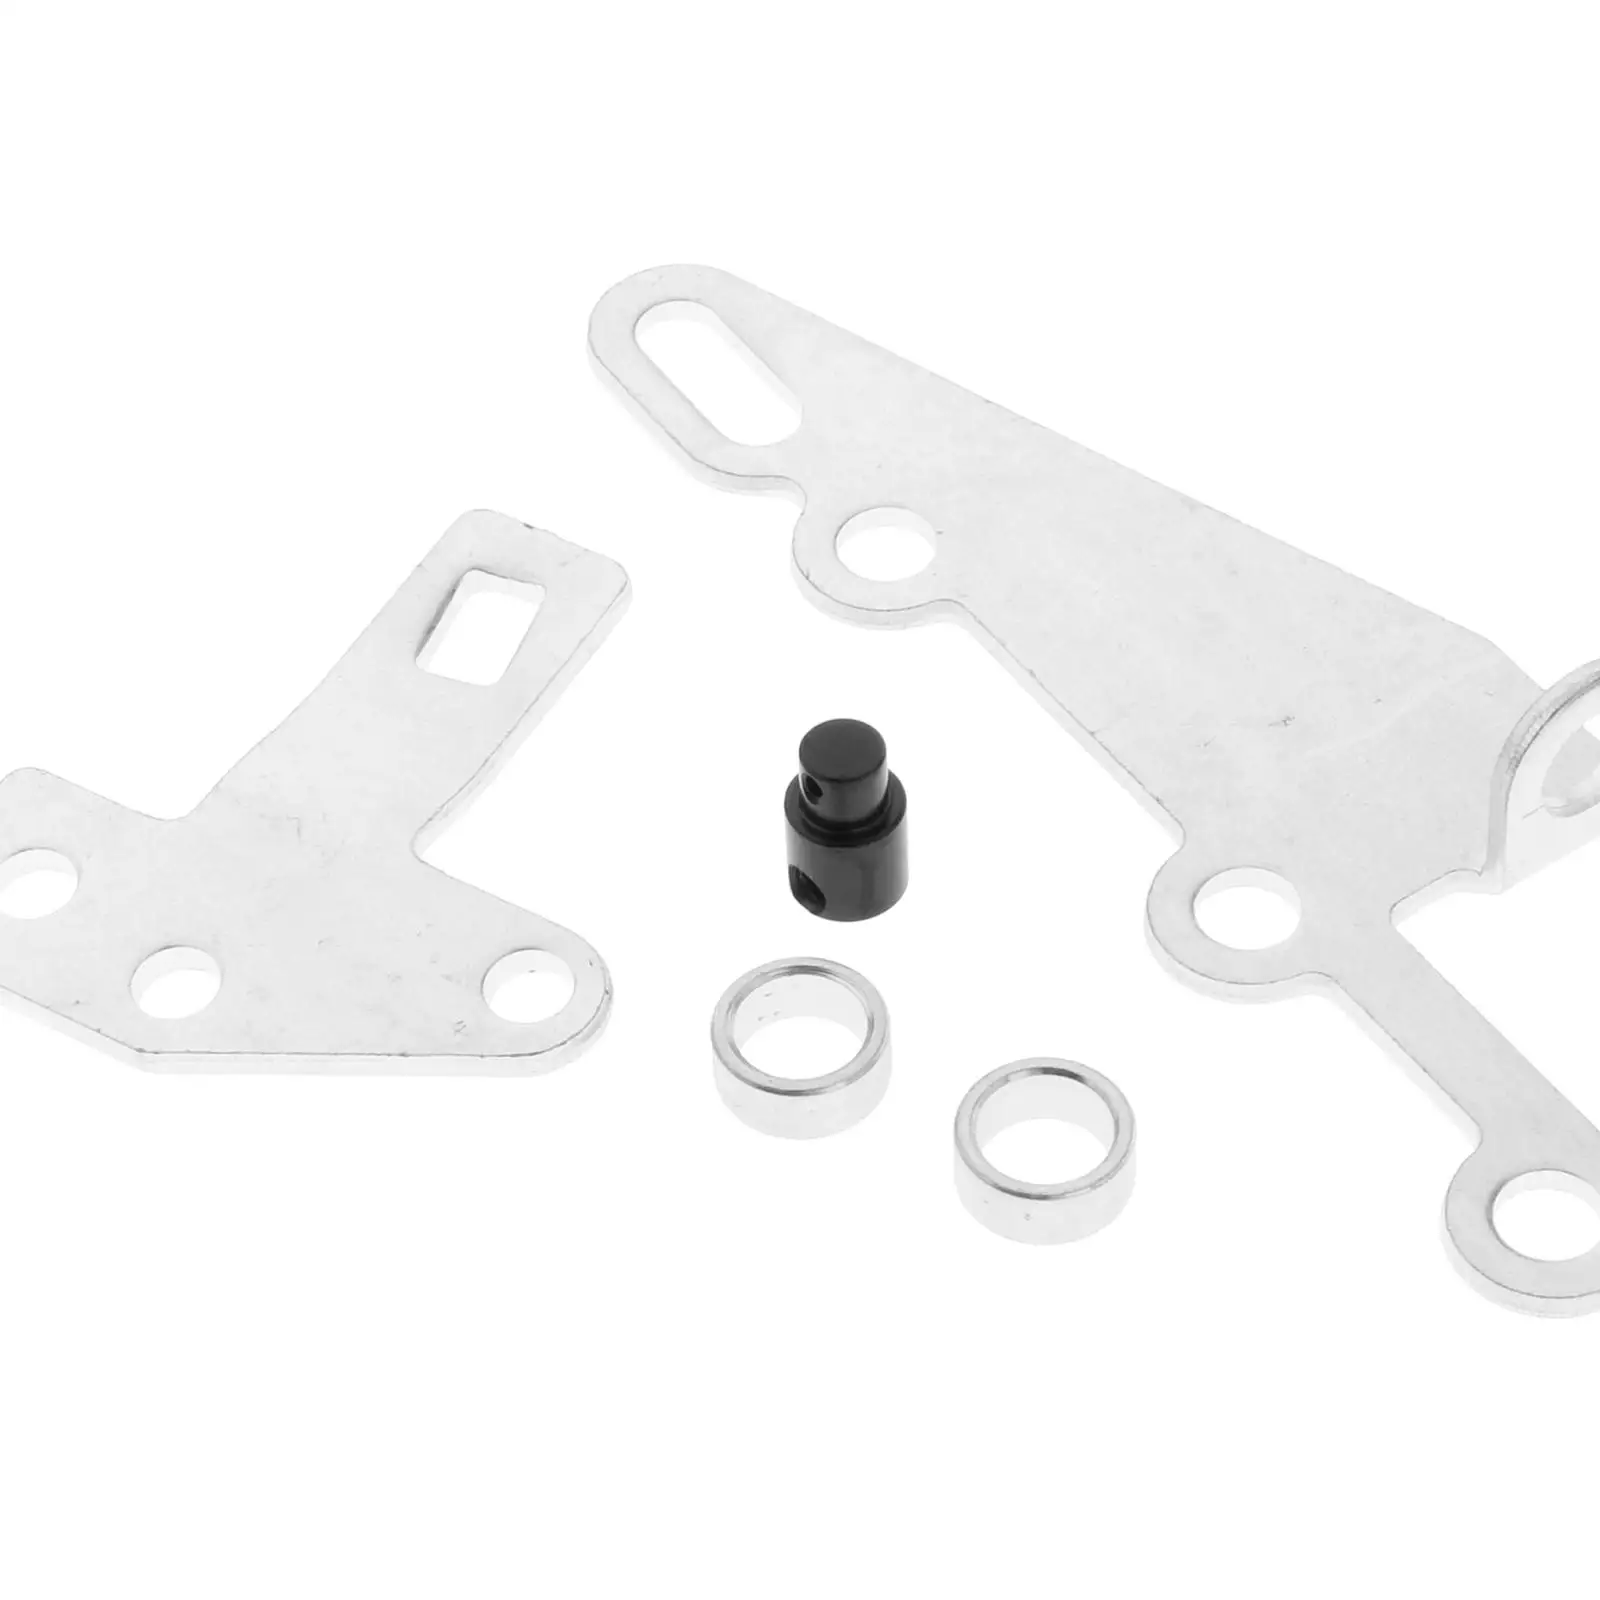 Bracket & Lever Kit Fits for TH400 TH350 TH250 700R4 Automatic Transmissions